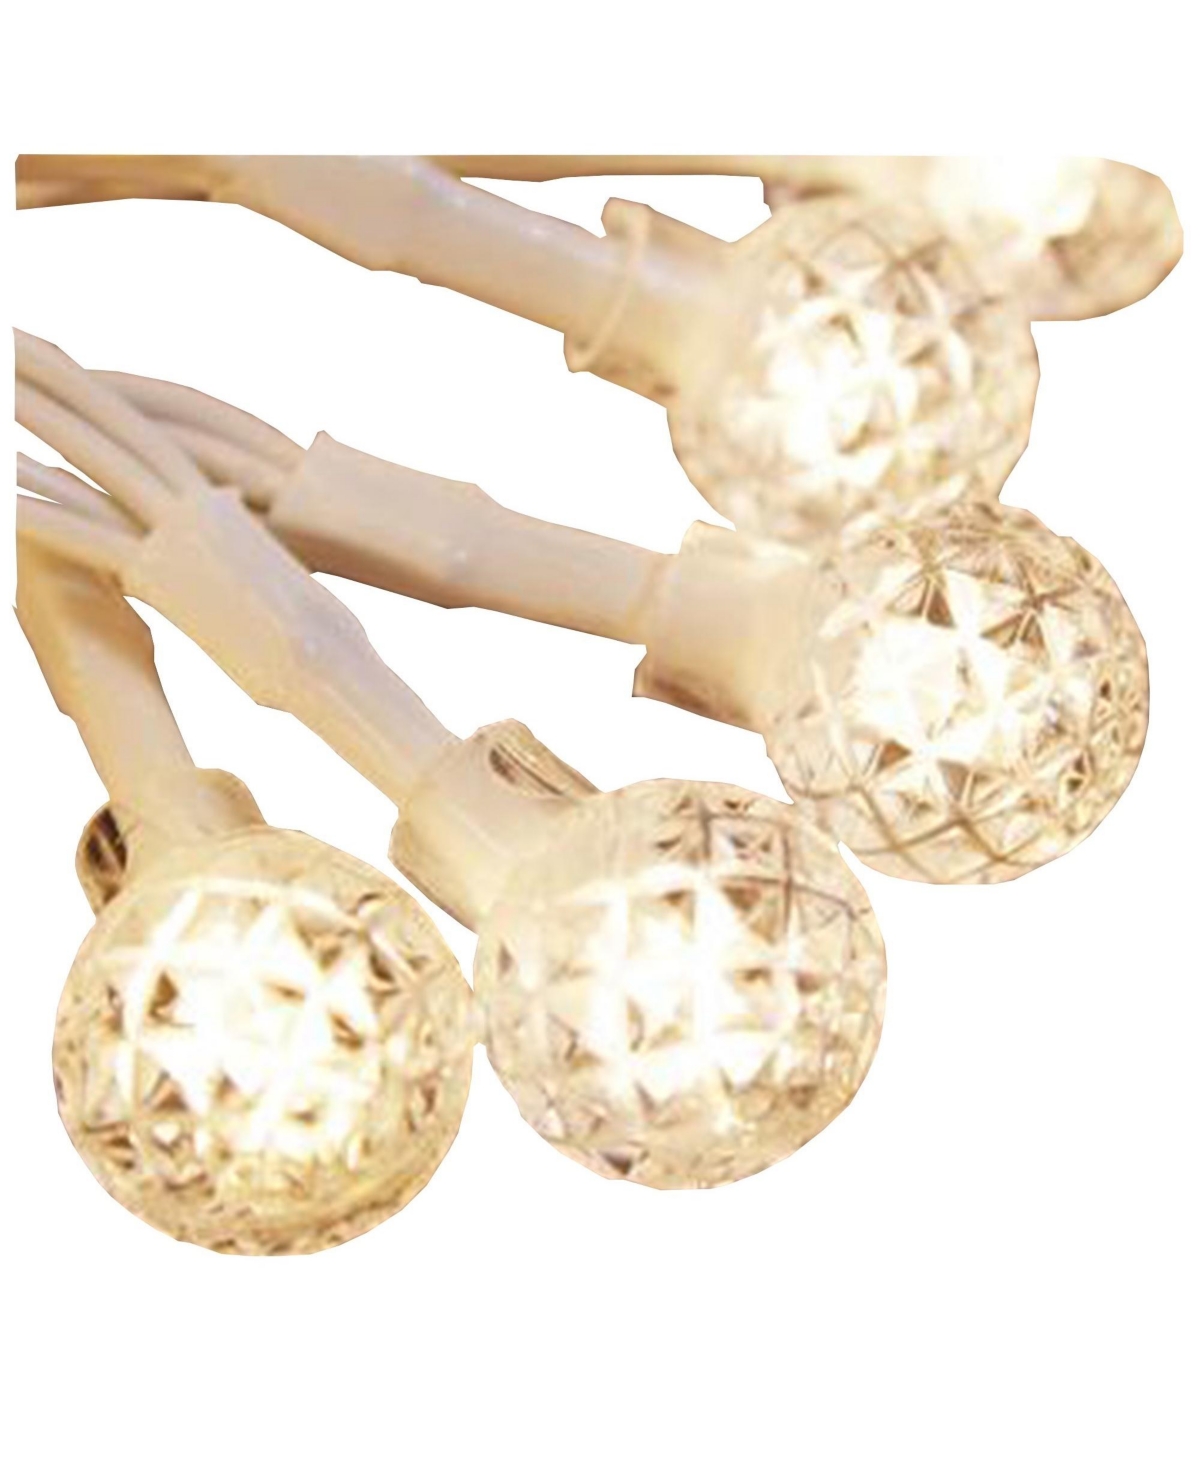 Product Works Productworks 18183 Light String, 6.5 X 10 Feet, Warm White Berry